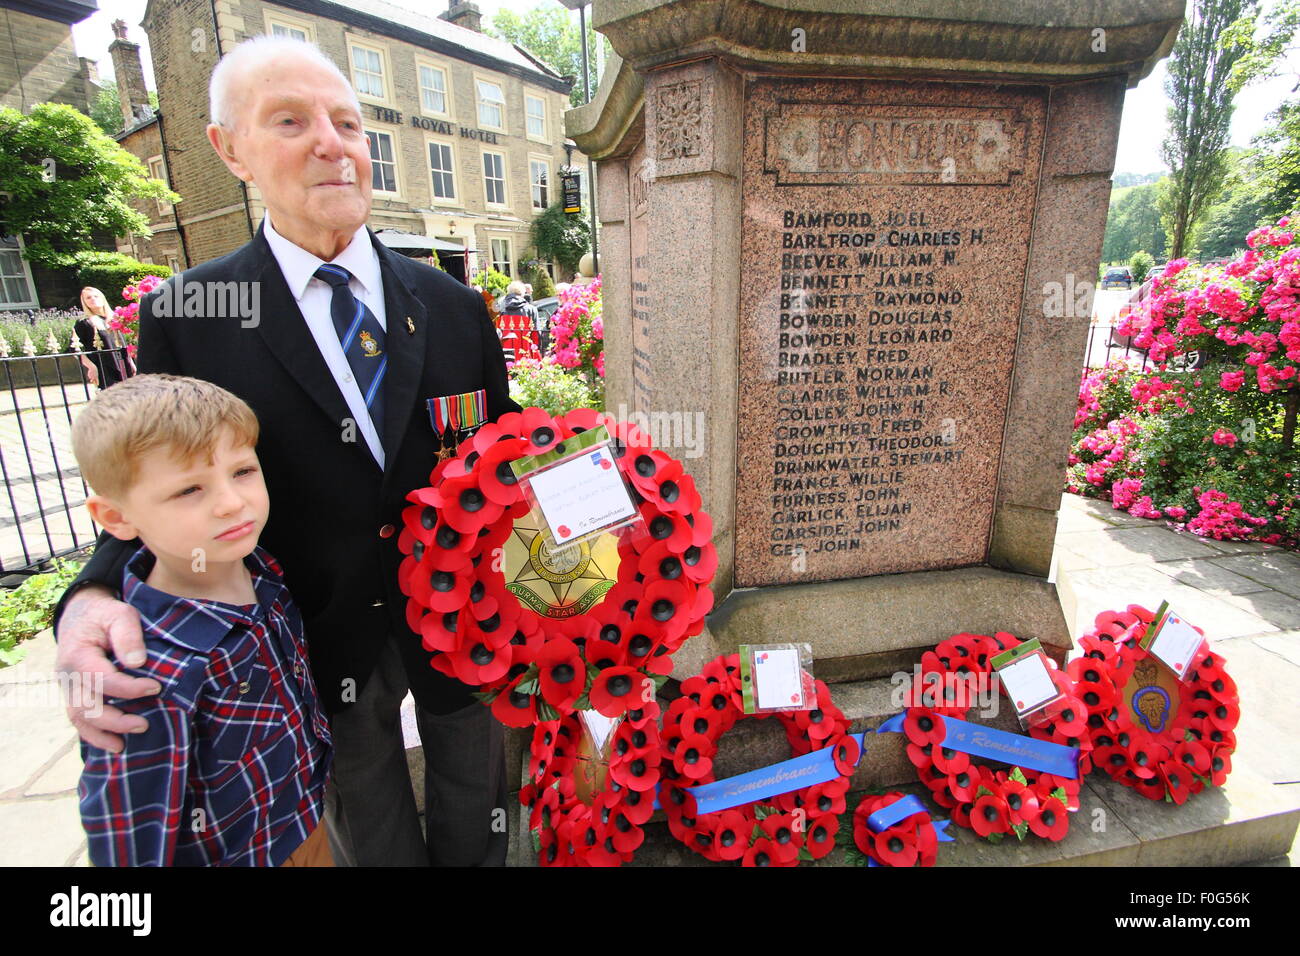 Hayfield, High Peak, Derbyshire, UK. 15 August 2015. Second World War veteran and President of Hayfield Royal British Legion, Albert Knowles with his youngest great-grandson, Cayden Knowles, 7, at the VJ Day 70th anniversary service at Hayfield War Memorial. A Royal British Legion member for 70 years, Albert is approaching his 100th birthday. The Far East veteran served in Burma, Malaya, India and Singapore, reaching the rank of Captain. He became President of the Royal British Legion Hayfield Branch in 1950 and is believed to be the longest serving Branch President in the UK. © Matthew Taylor Stock Photo